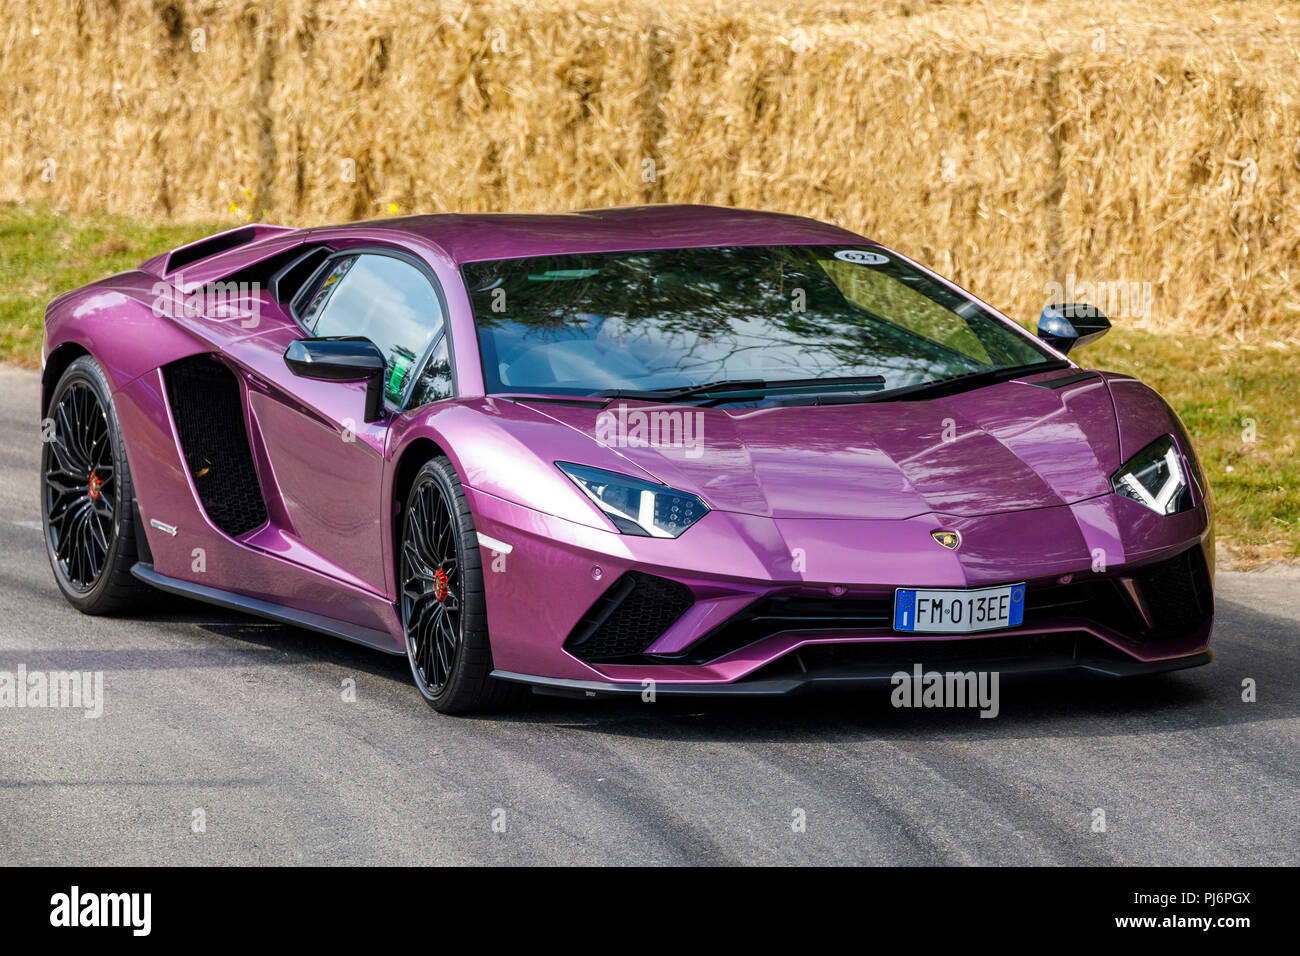 Lamborghini Aventador High Resolution Stock Photography And Images Alamy